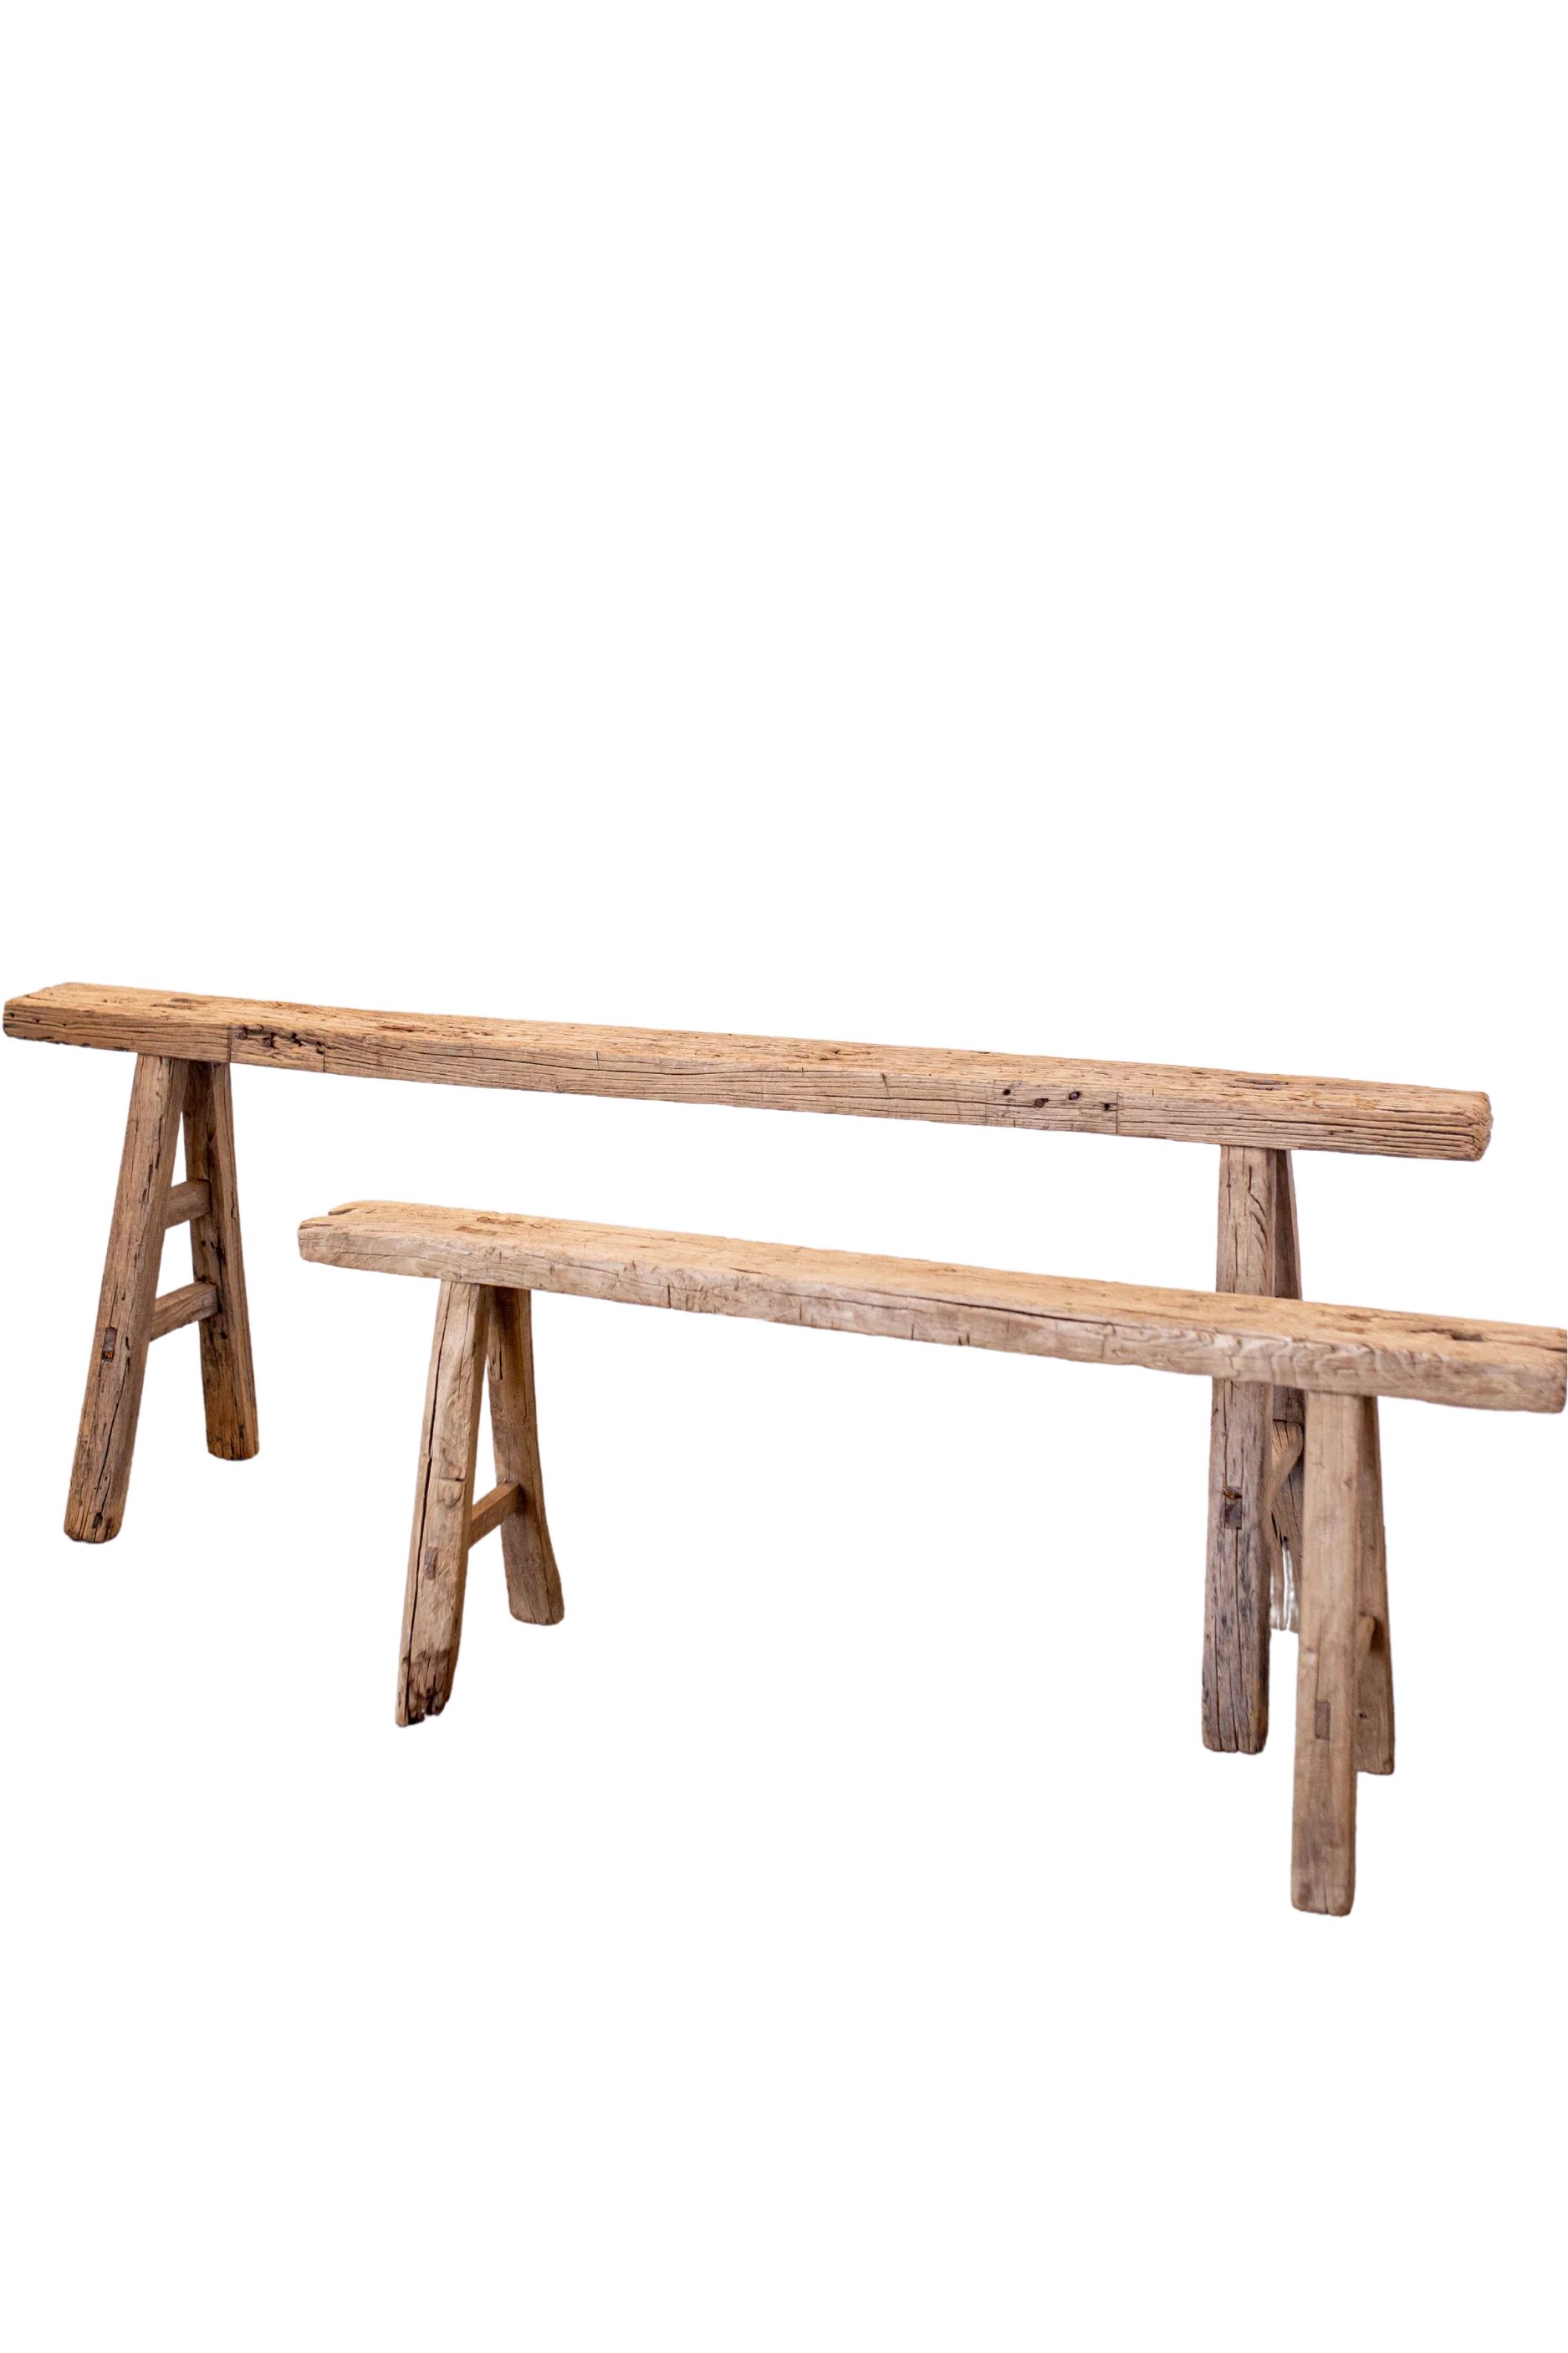 Vintage Skinny Reclaimed Wood Bench | Luxe B Co